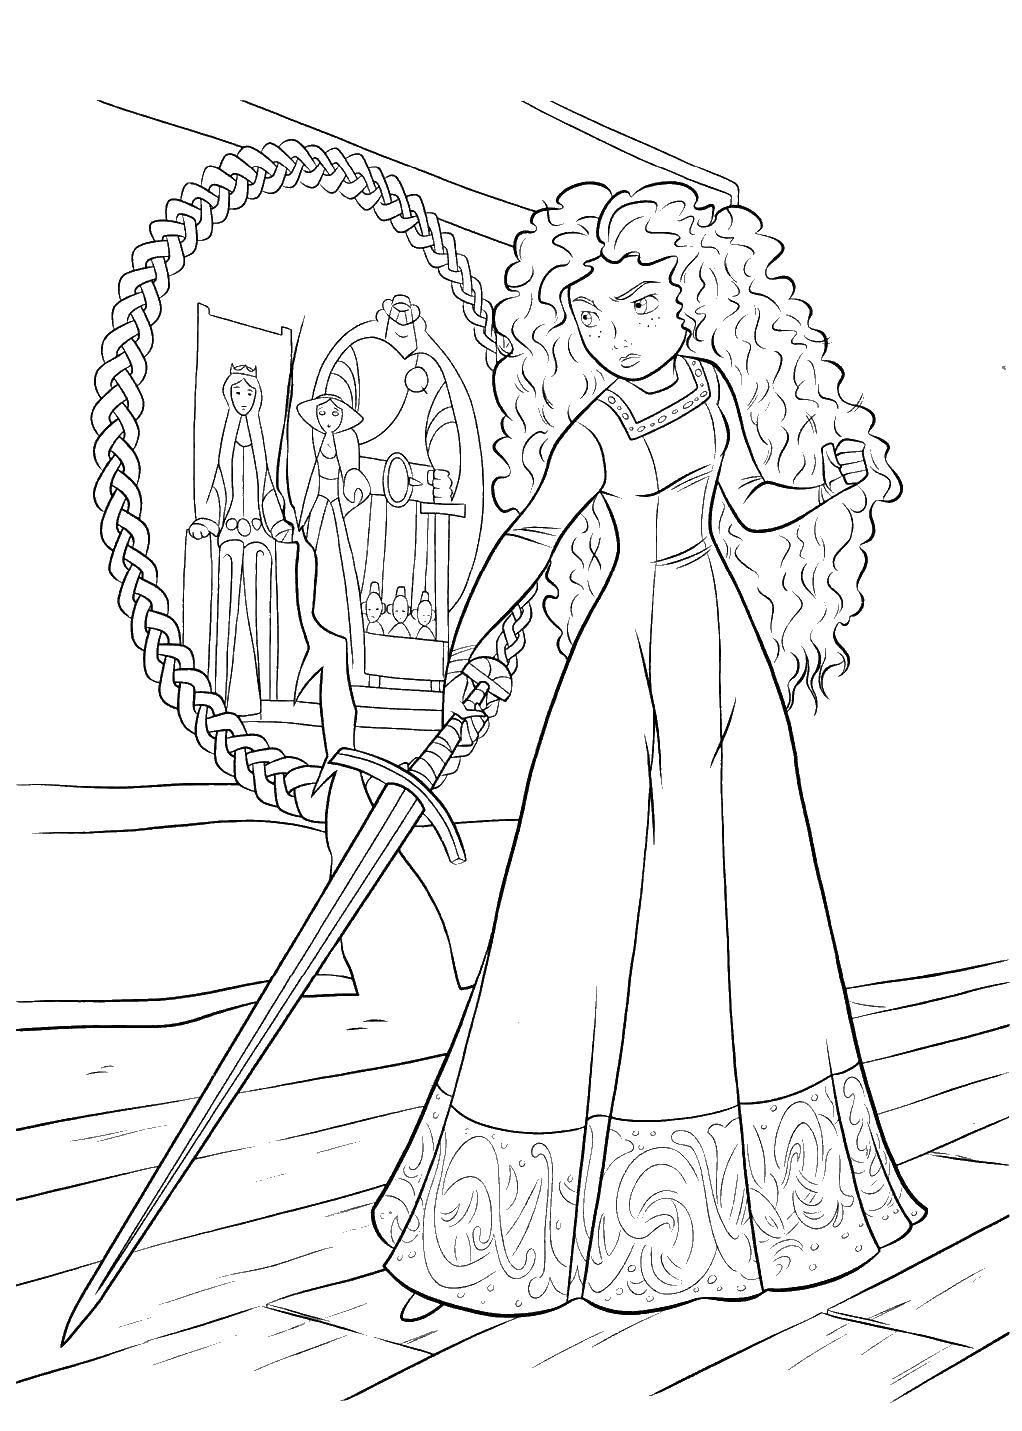 Coloring Merida with a sword. Category brave heart. Tags:  Merida, girl, sword.